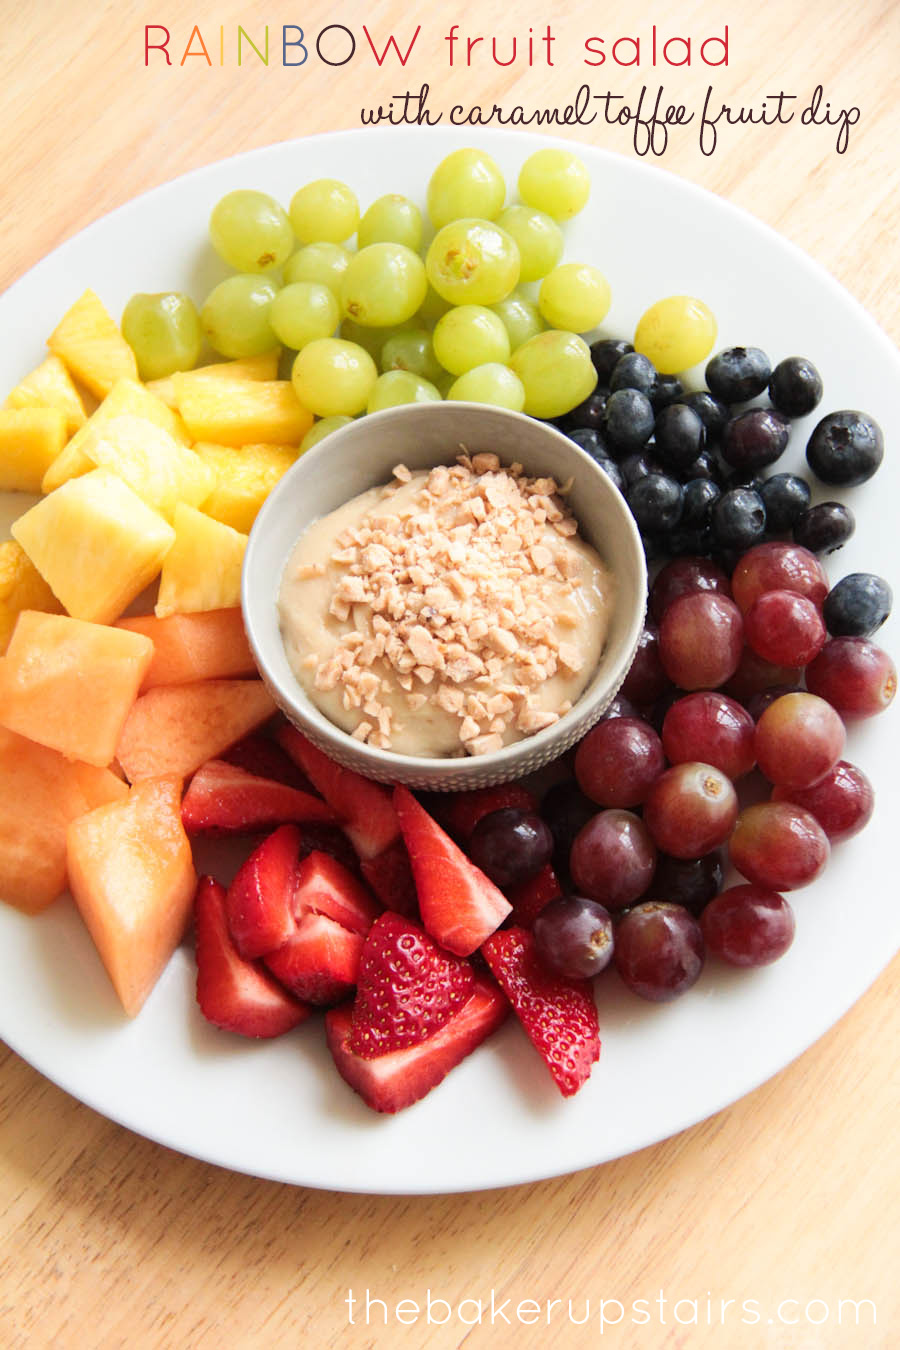 the baker upstairs: rainbow fruit salad with caramel toffee fruit dip